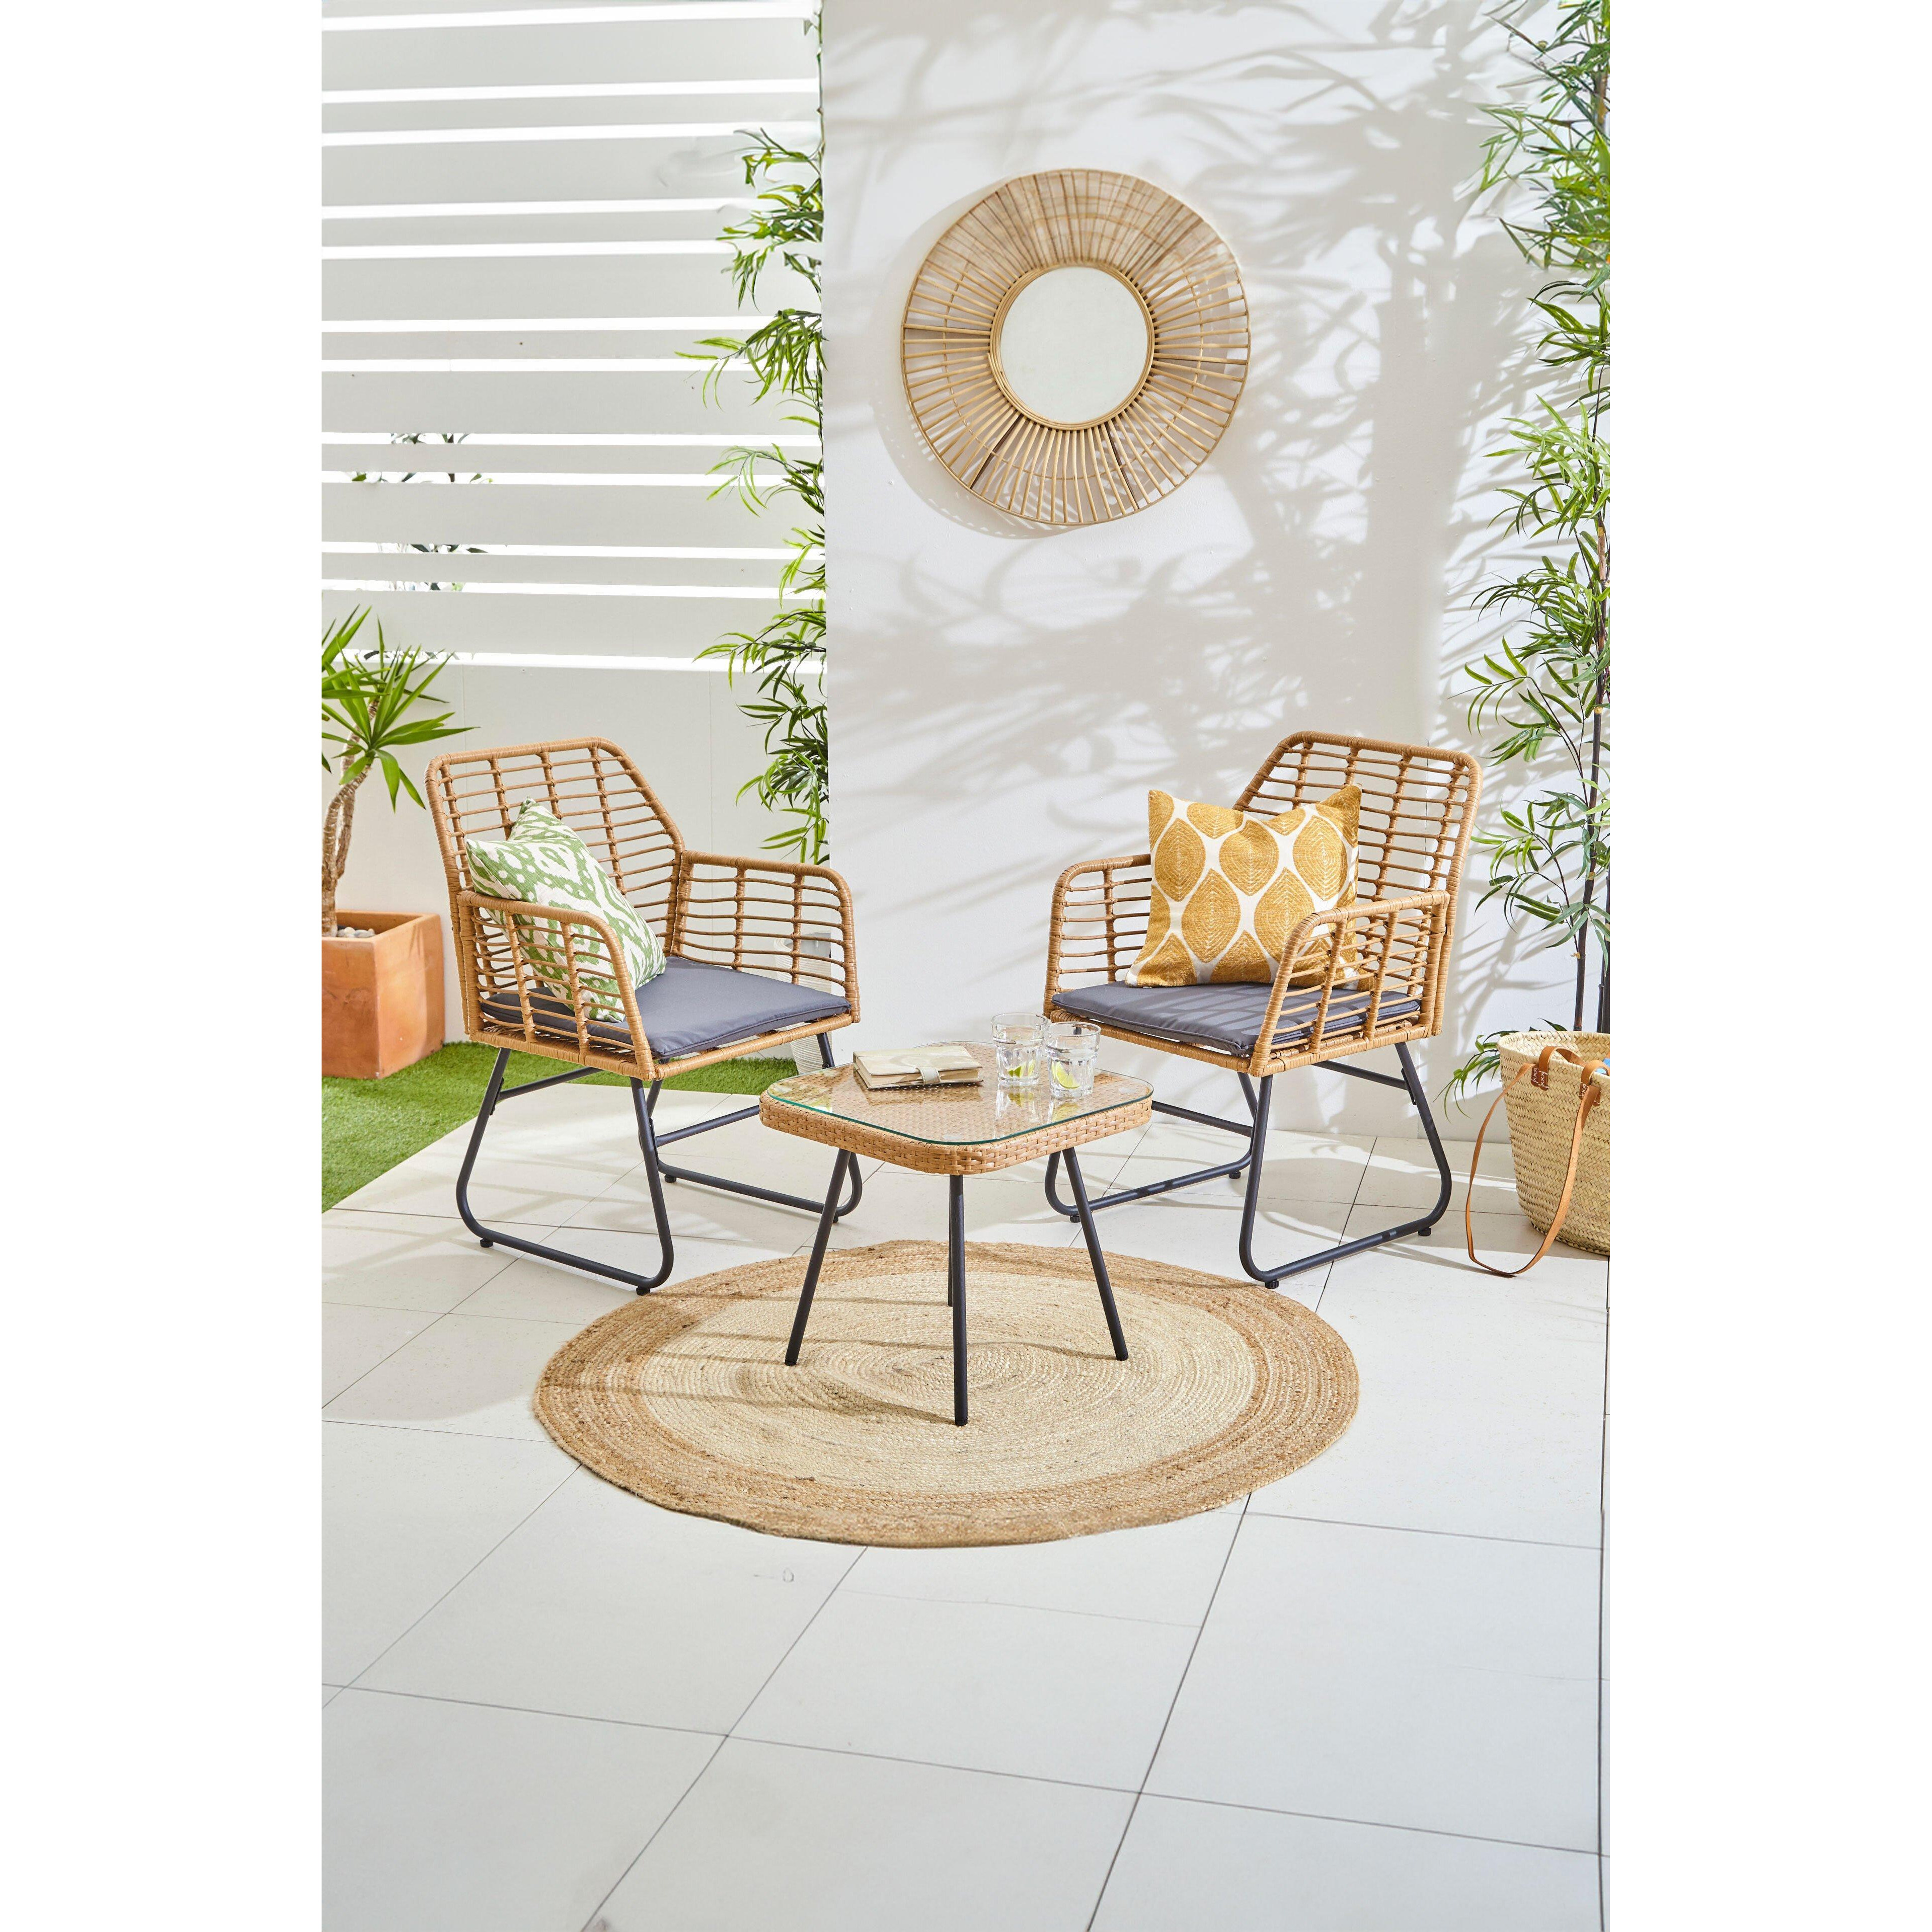 3 Piece Bamboo Style Garden Table & Chairs Bistro Set - image 1